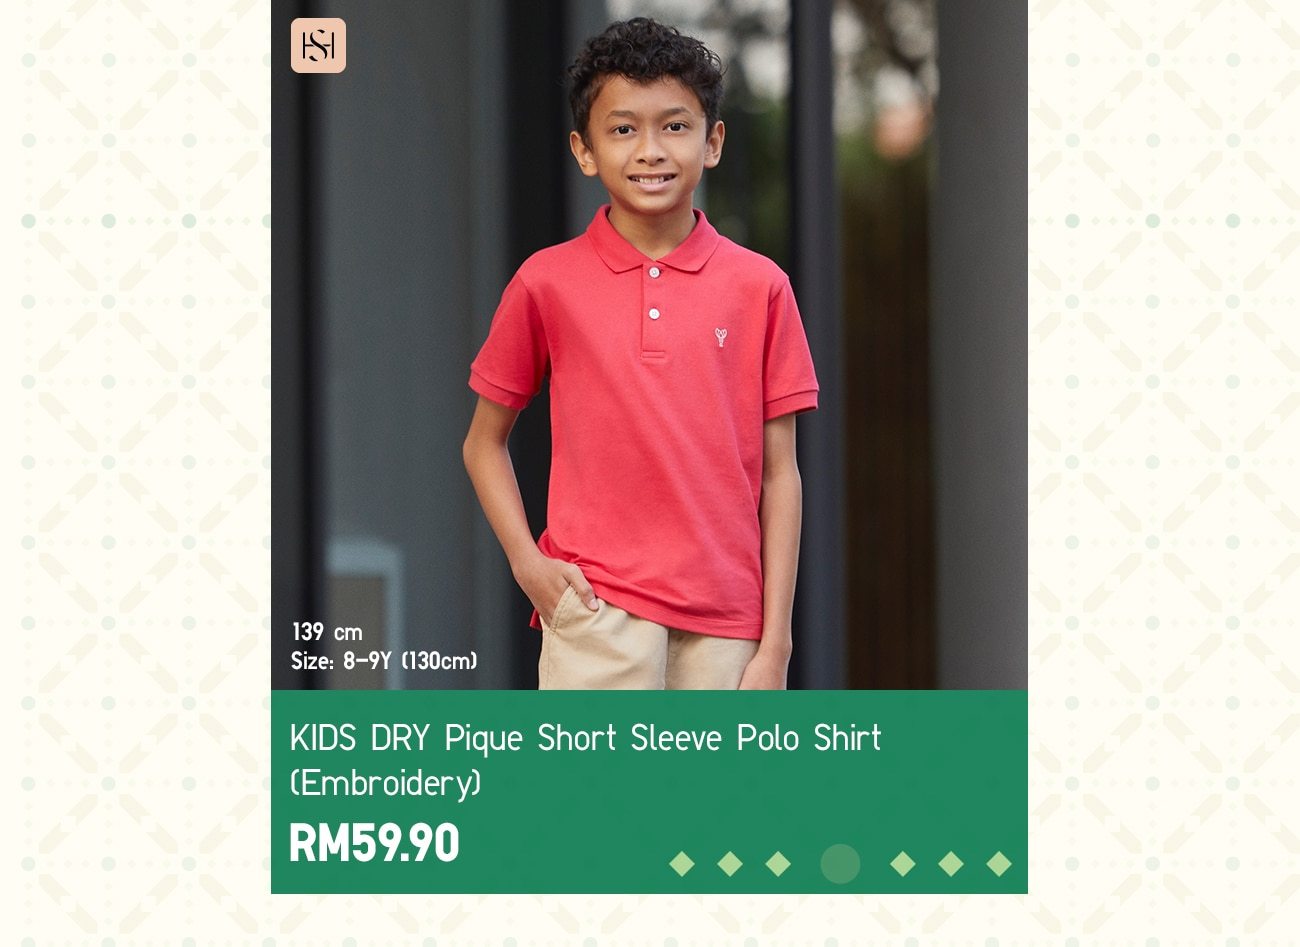 KIDS DRY Pique Short Sleeve Polo Shirt (Embroidery)